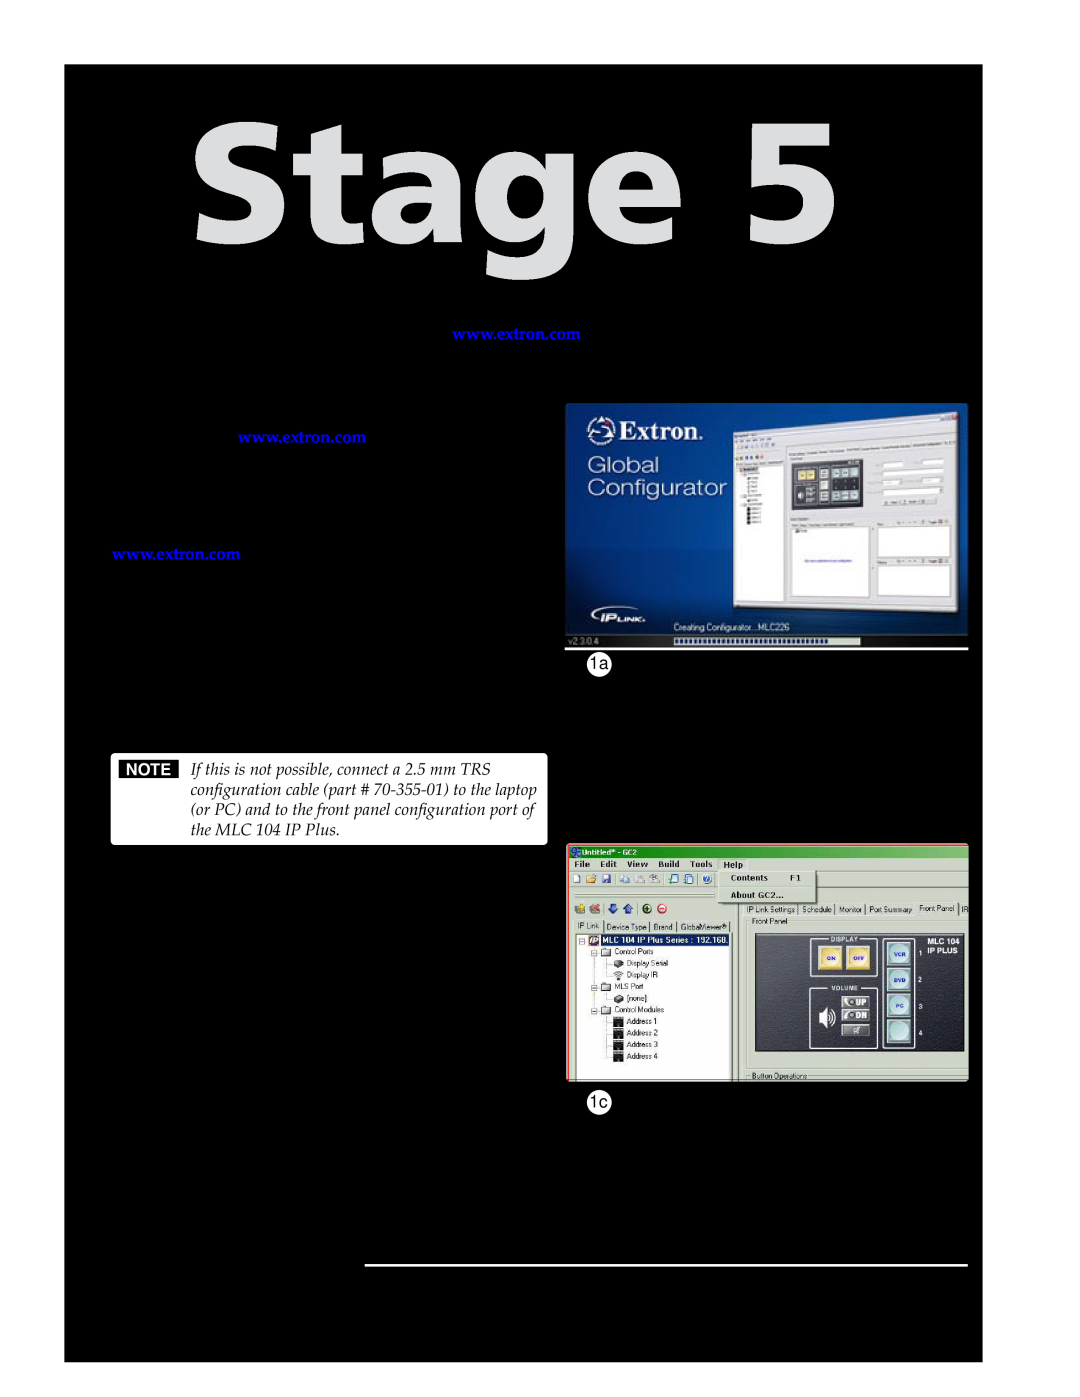 Extron electronic 300, PVS 400, 200 Stage Five - Configure the System, Configure the system, MLC 104 IP Plus User’s Manual 